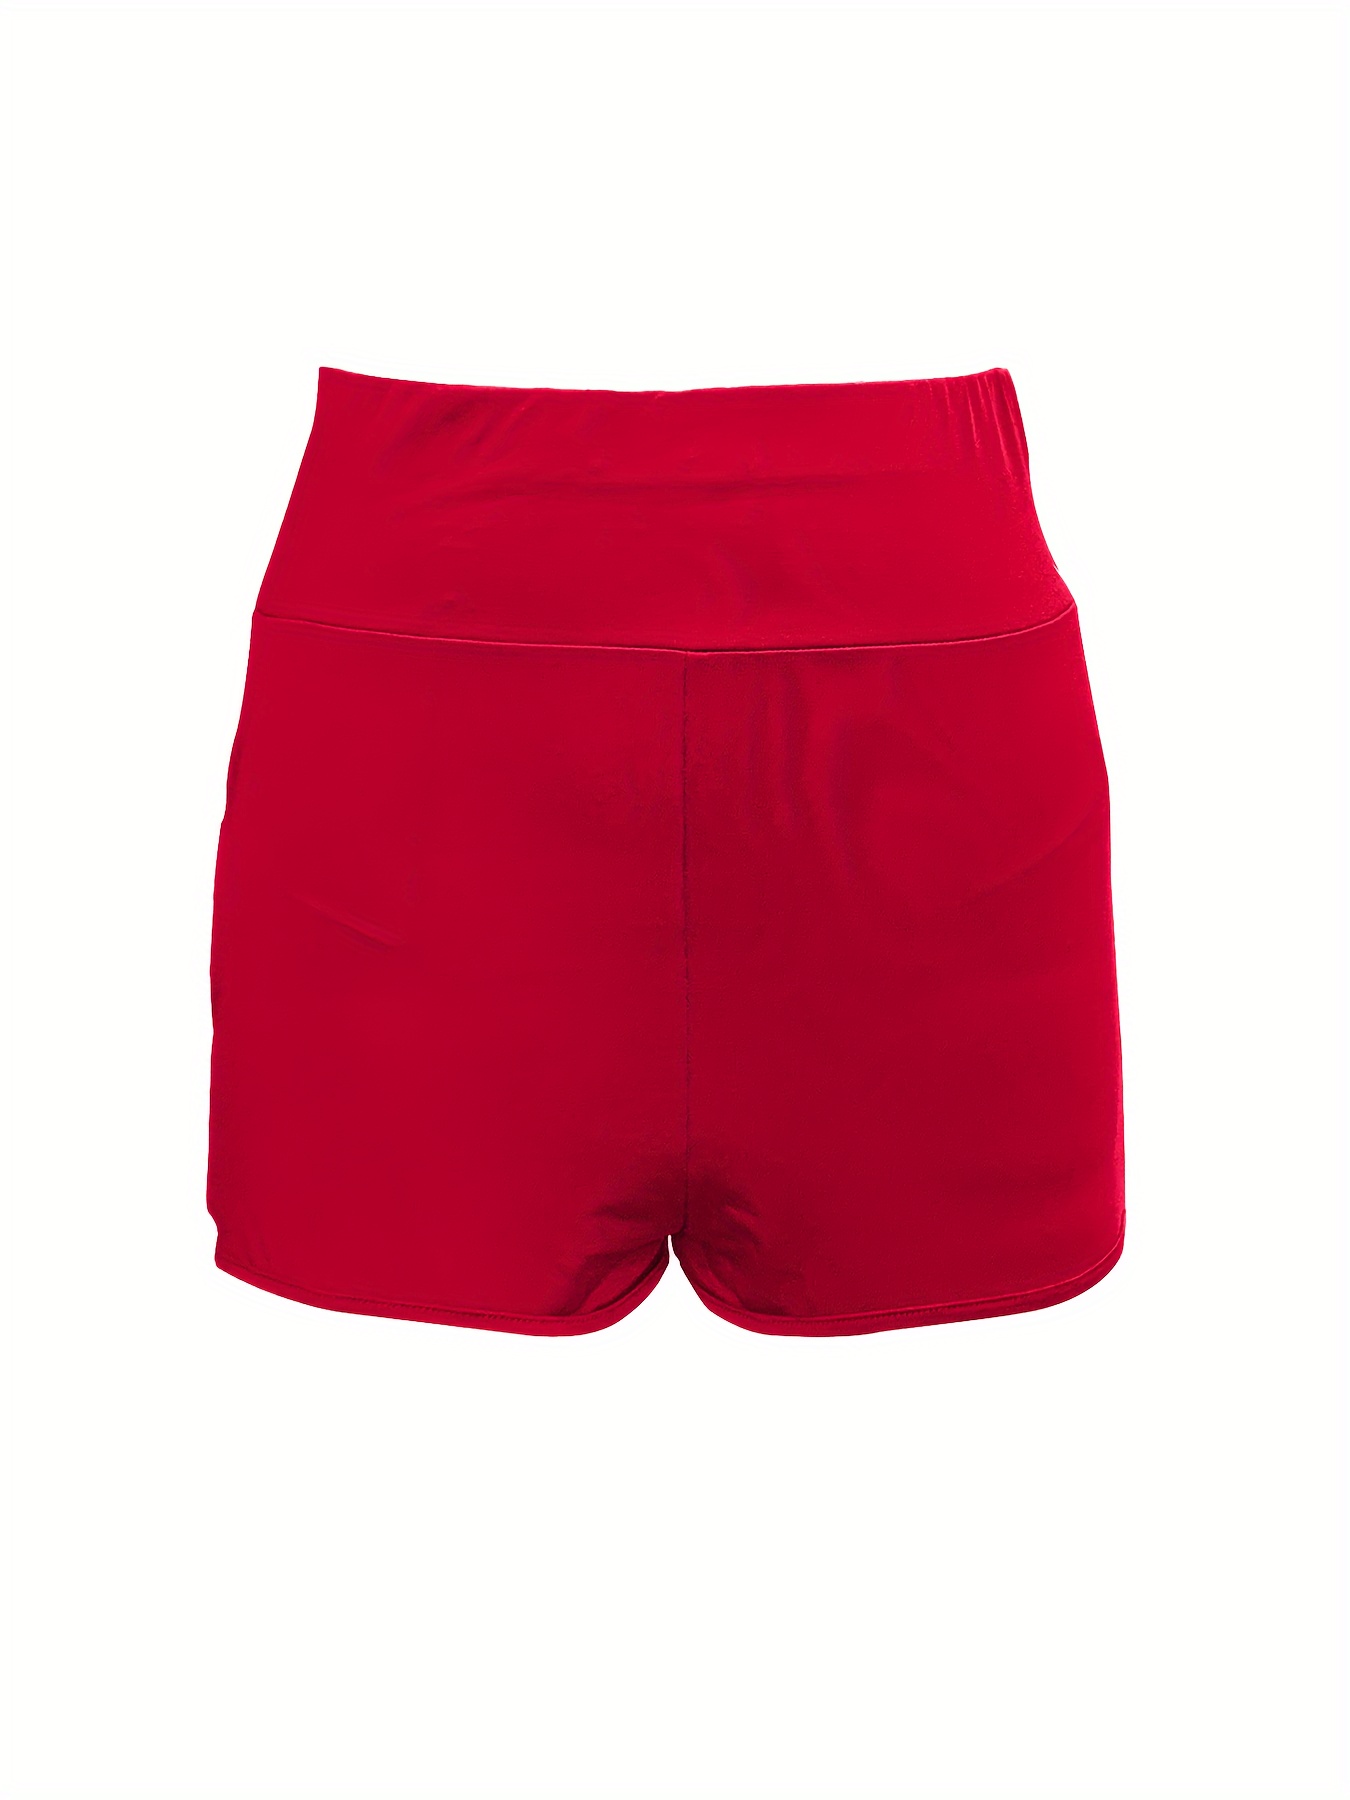 Red Shorts for Women